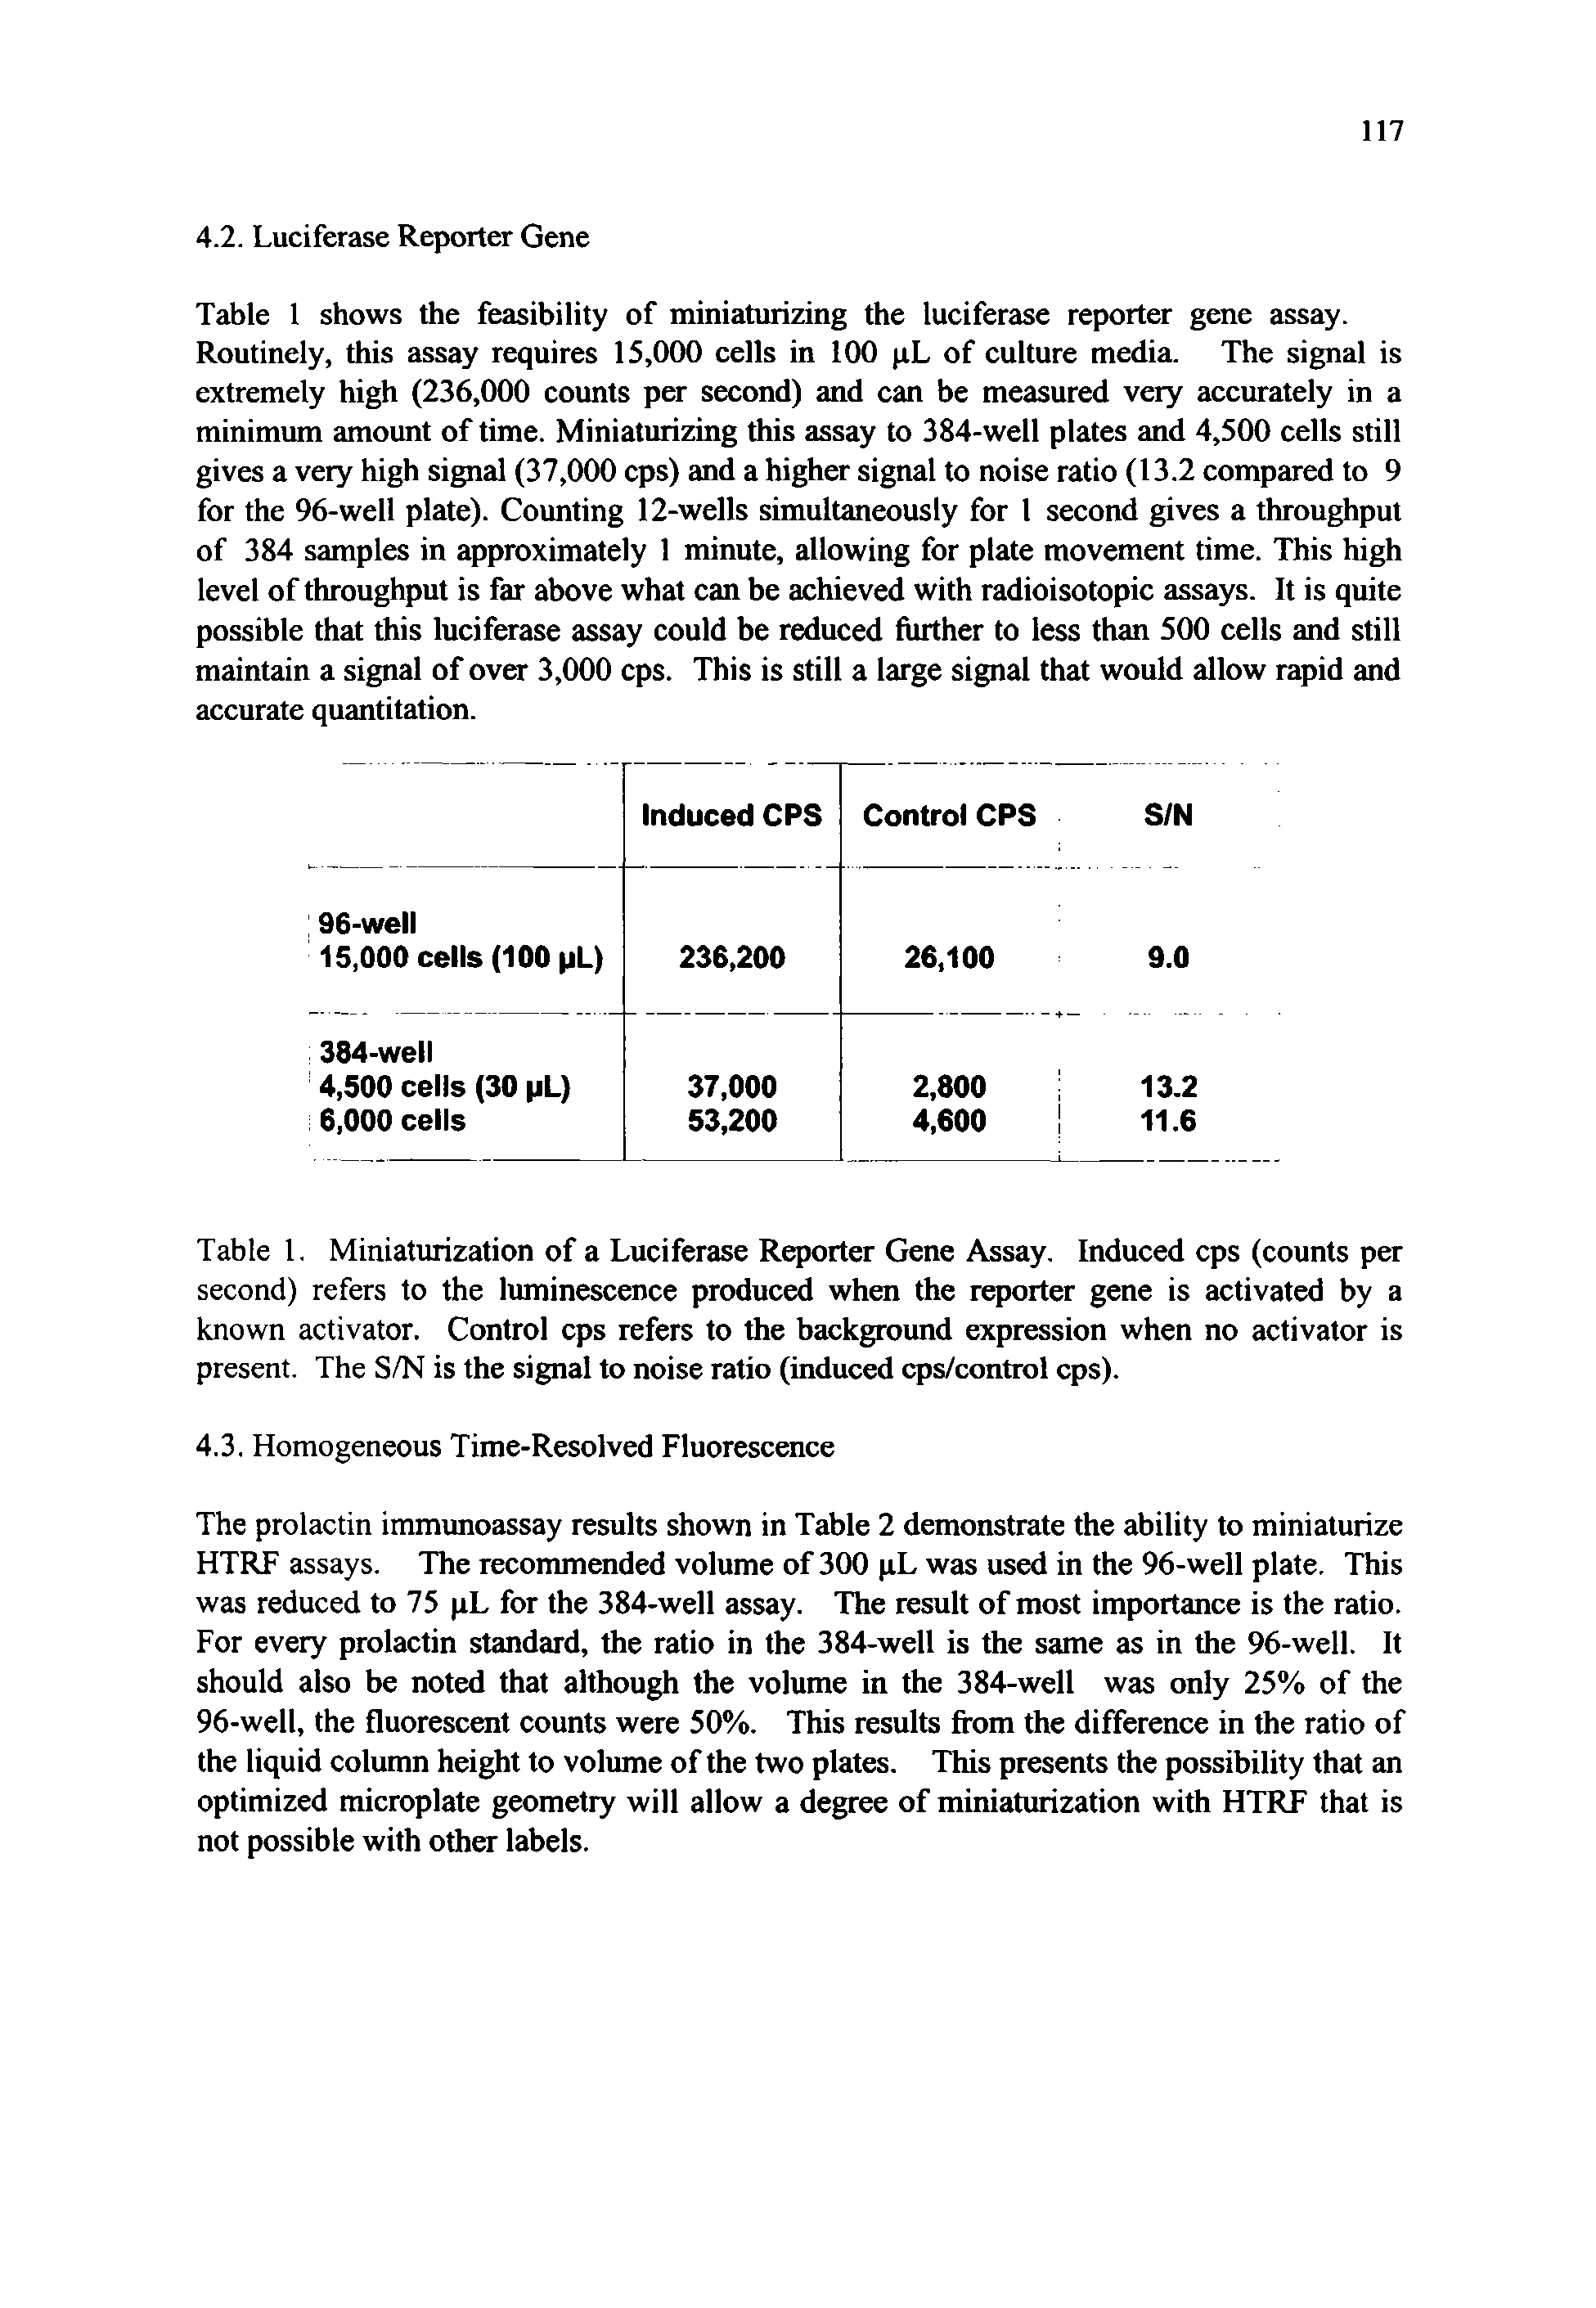 Table 1. Miniaturization of a Luciferase Reporter Gene Assay. Induced cps (counts per second) refers to the luminescence produced when the reporter gene is activated by a known activator. Control cps refers to the background expression when no activator is present. The S/N is the signal to noise ratio (induced cps/control cps).